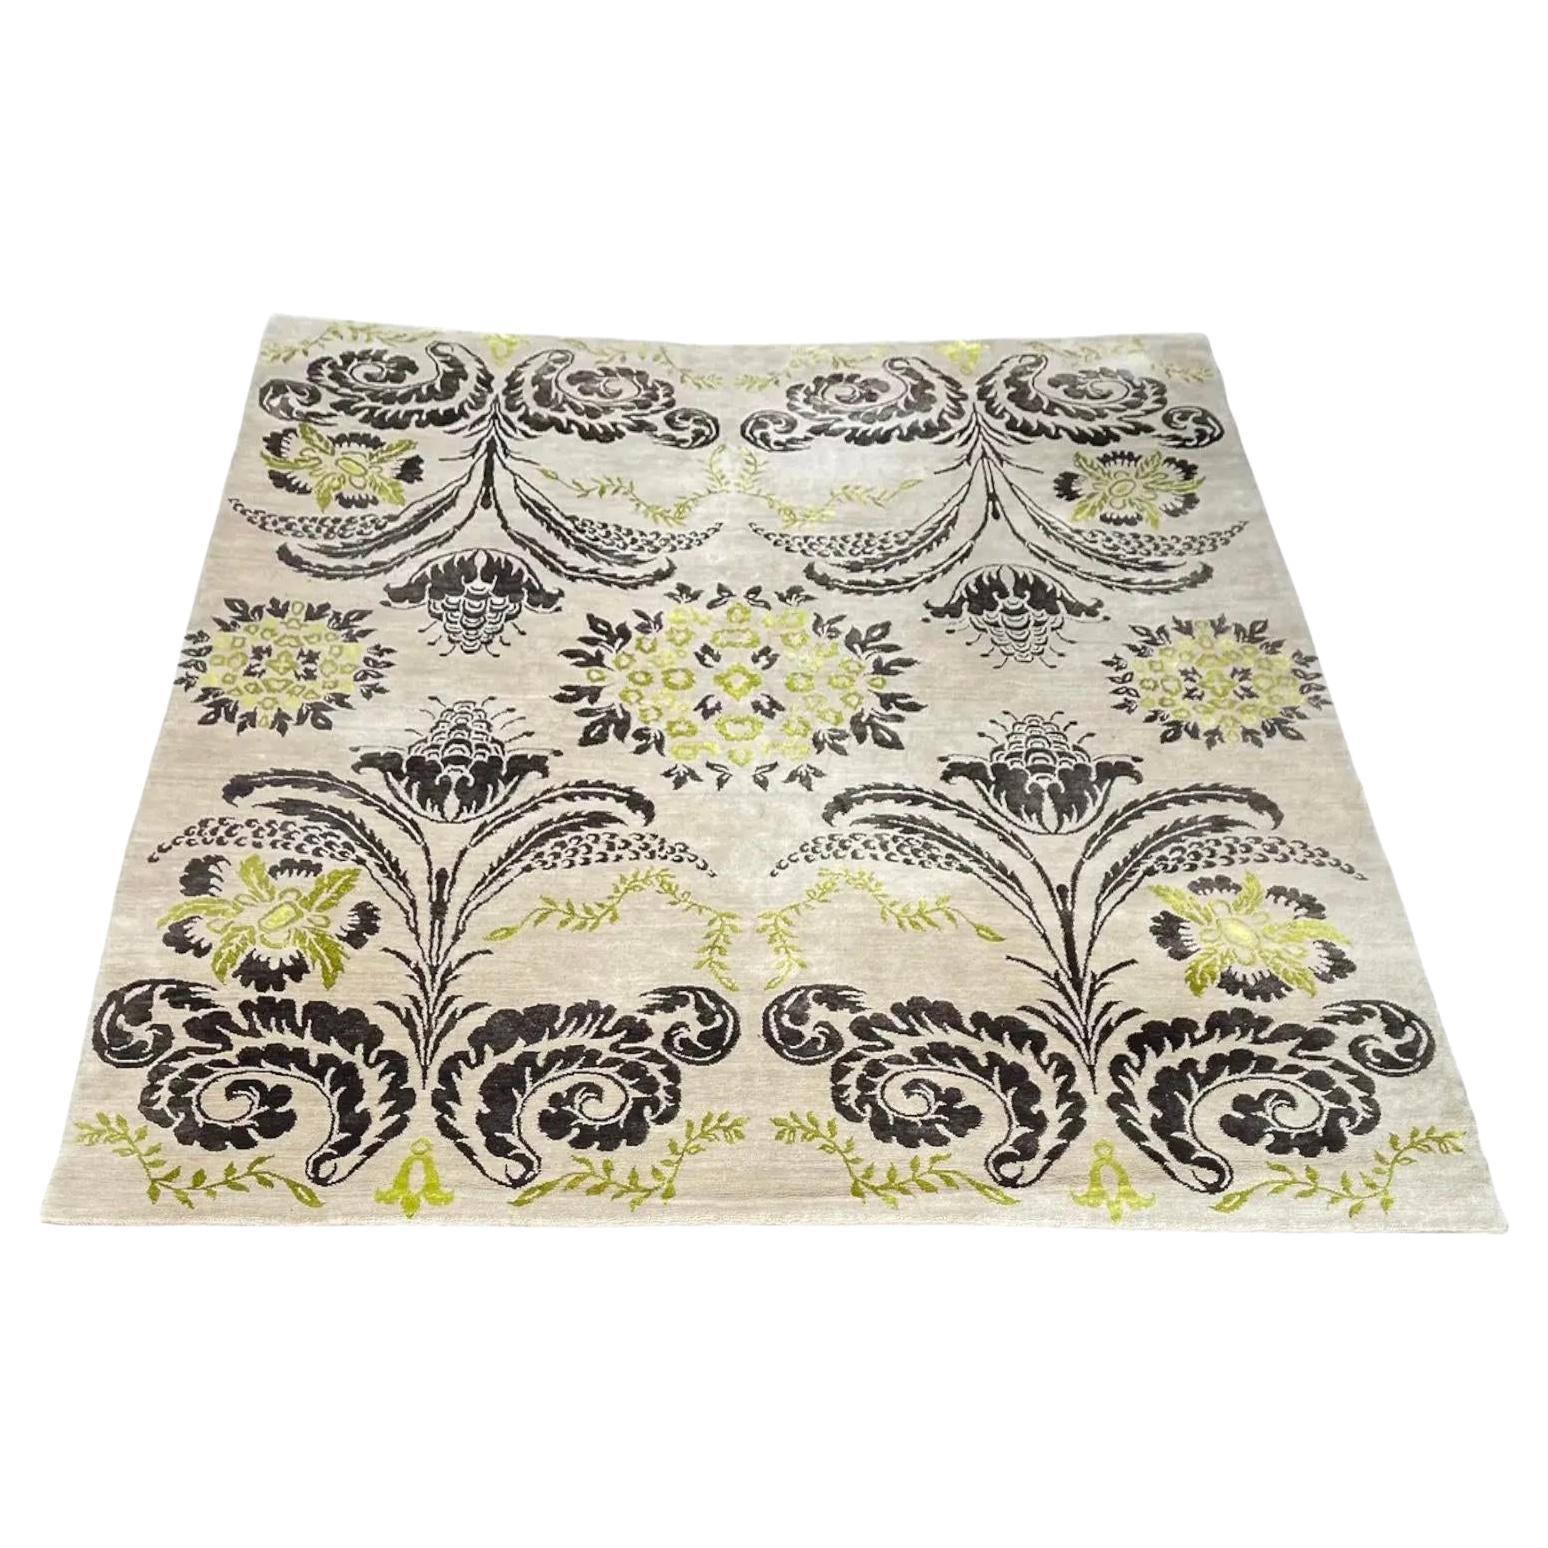 8' by 10' Modern Chartreuse & Beige Carpet by the Rug Company